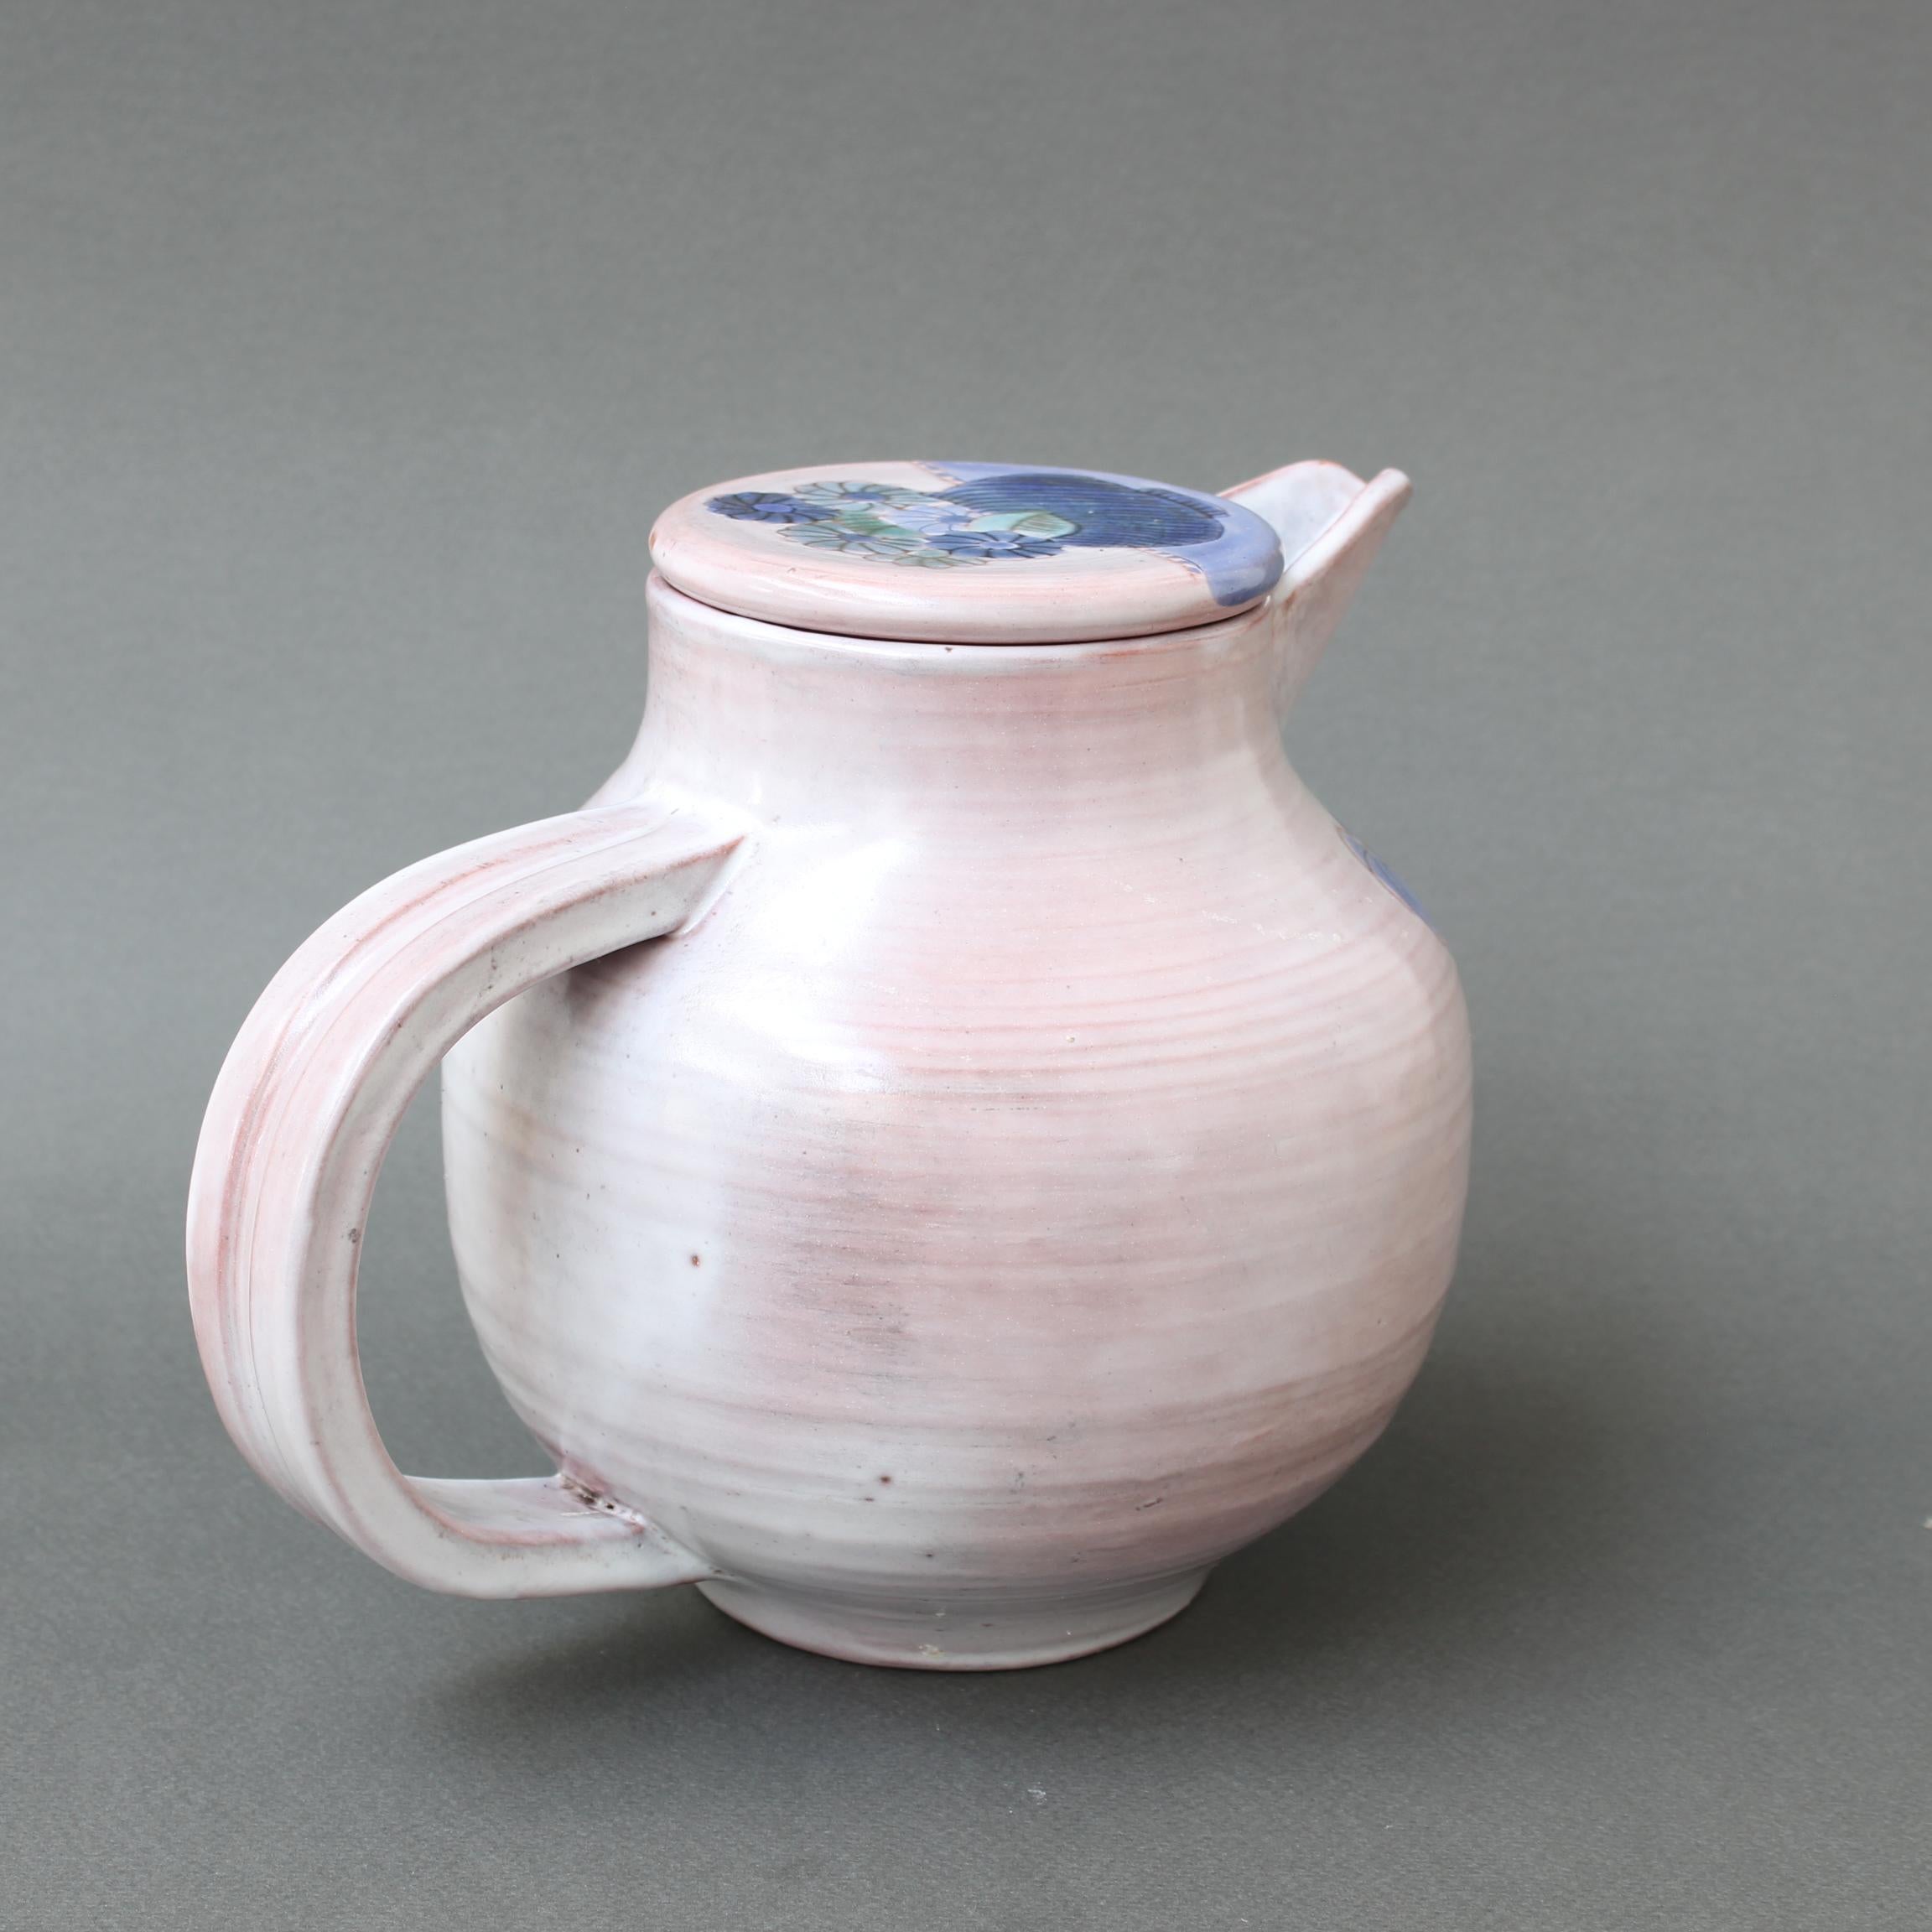 Late 20th Century French Decorative Ceramic Pitcher by the Cloutier Brothers (circa 1970s) For Sale